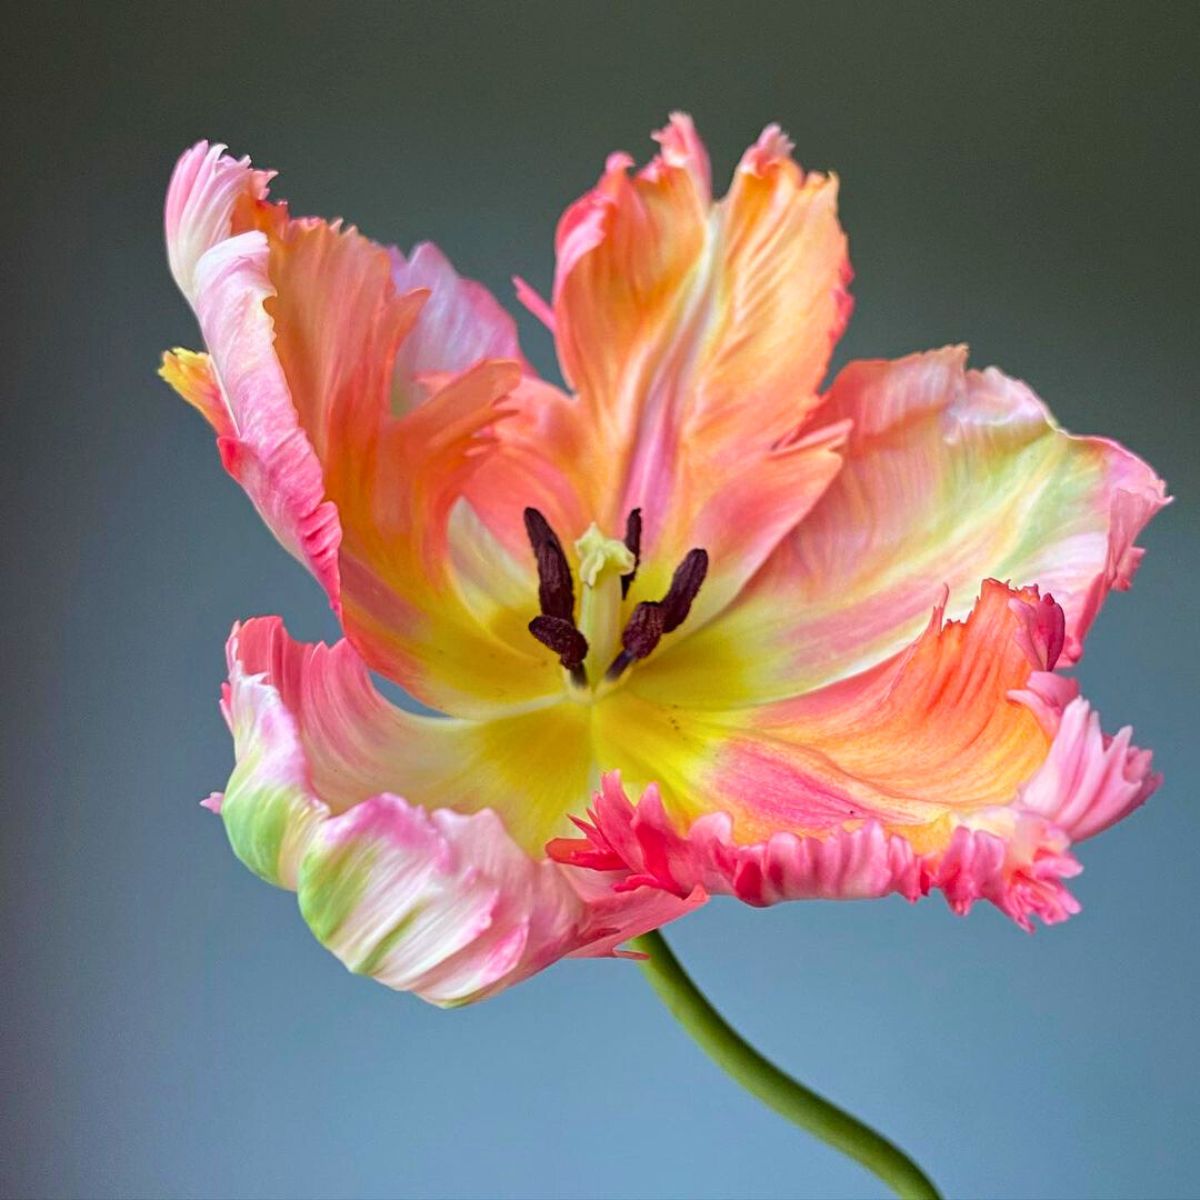 A blooming parrot tulip